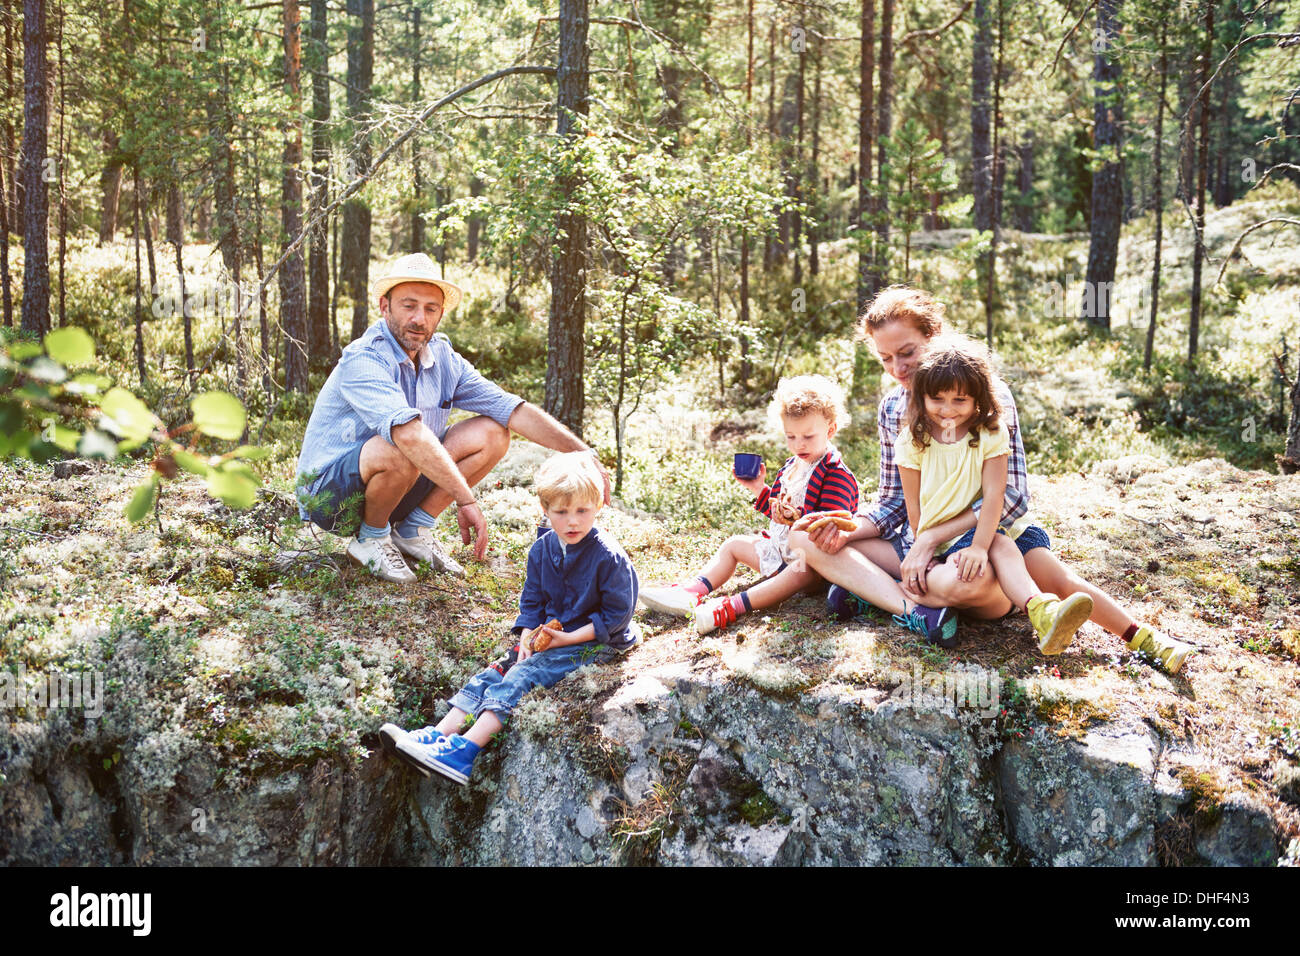 Family sitting on rocks in forest Stock Photo